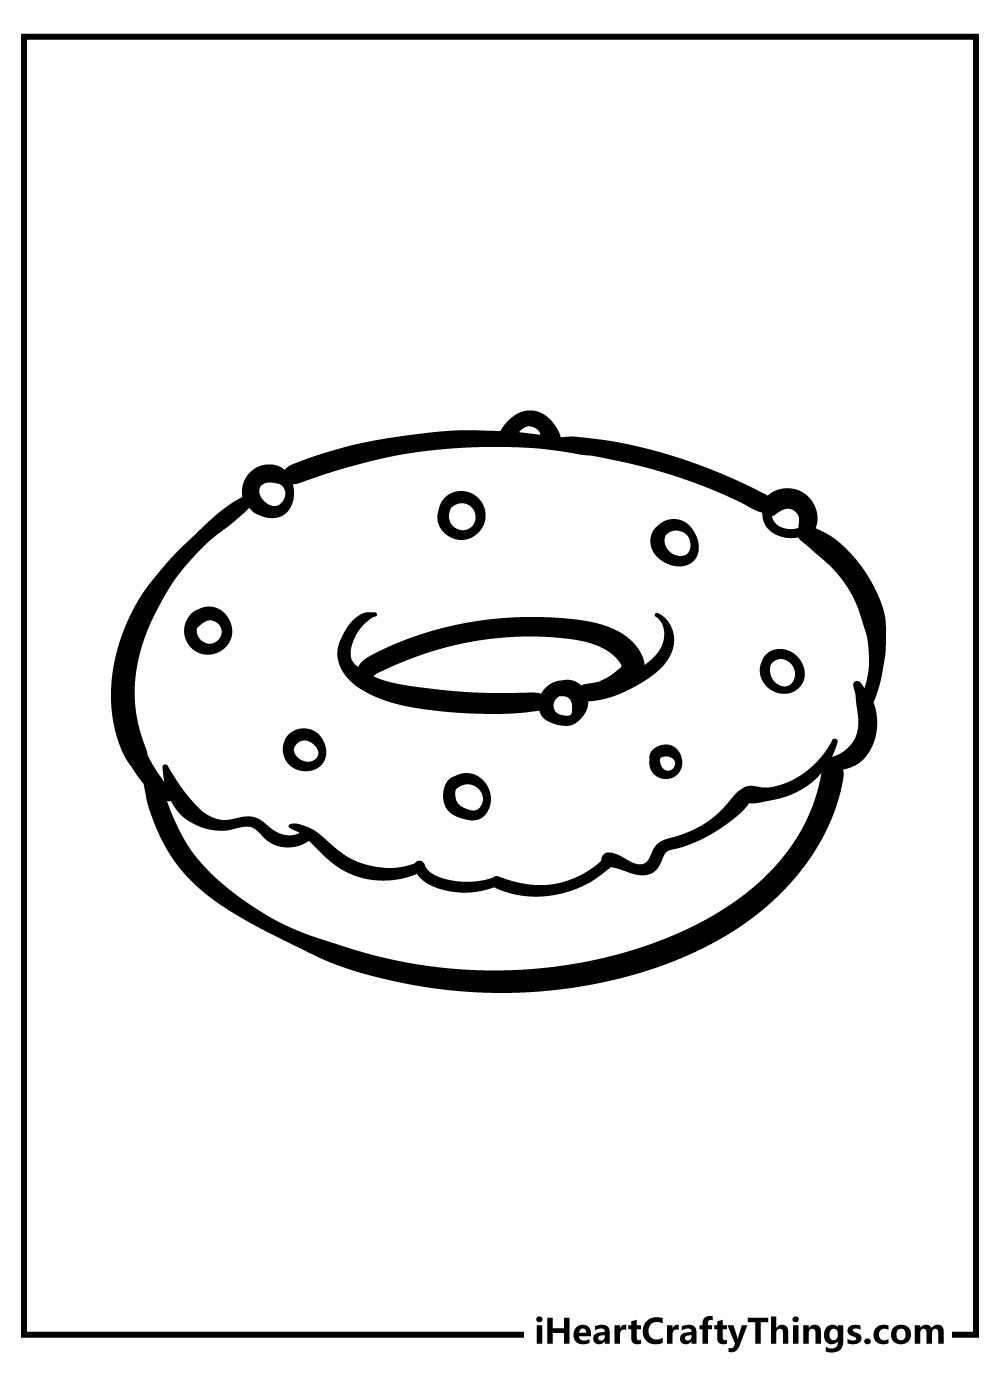 Donut Coloring Pages for preschoolers free printable